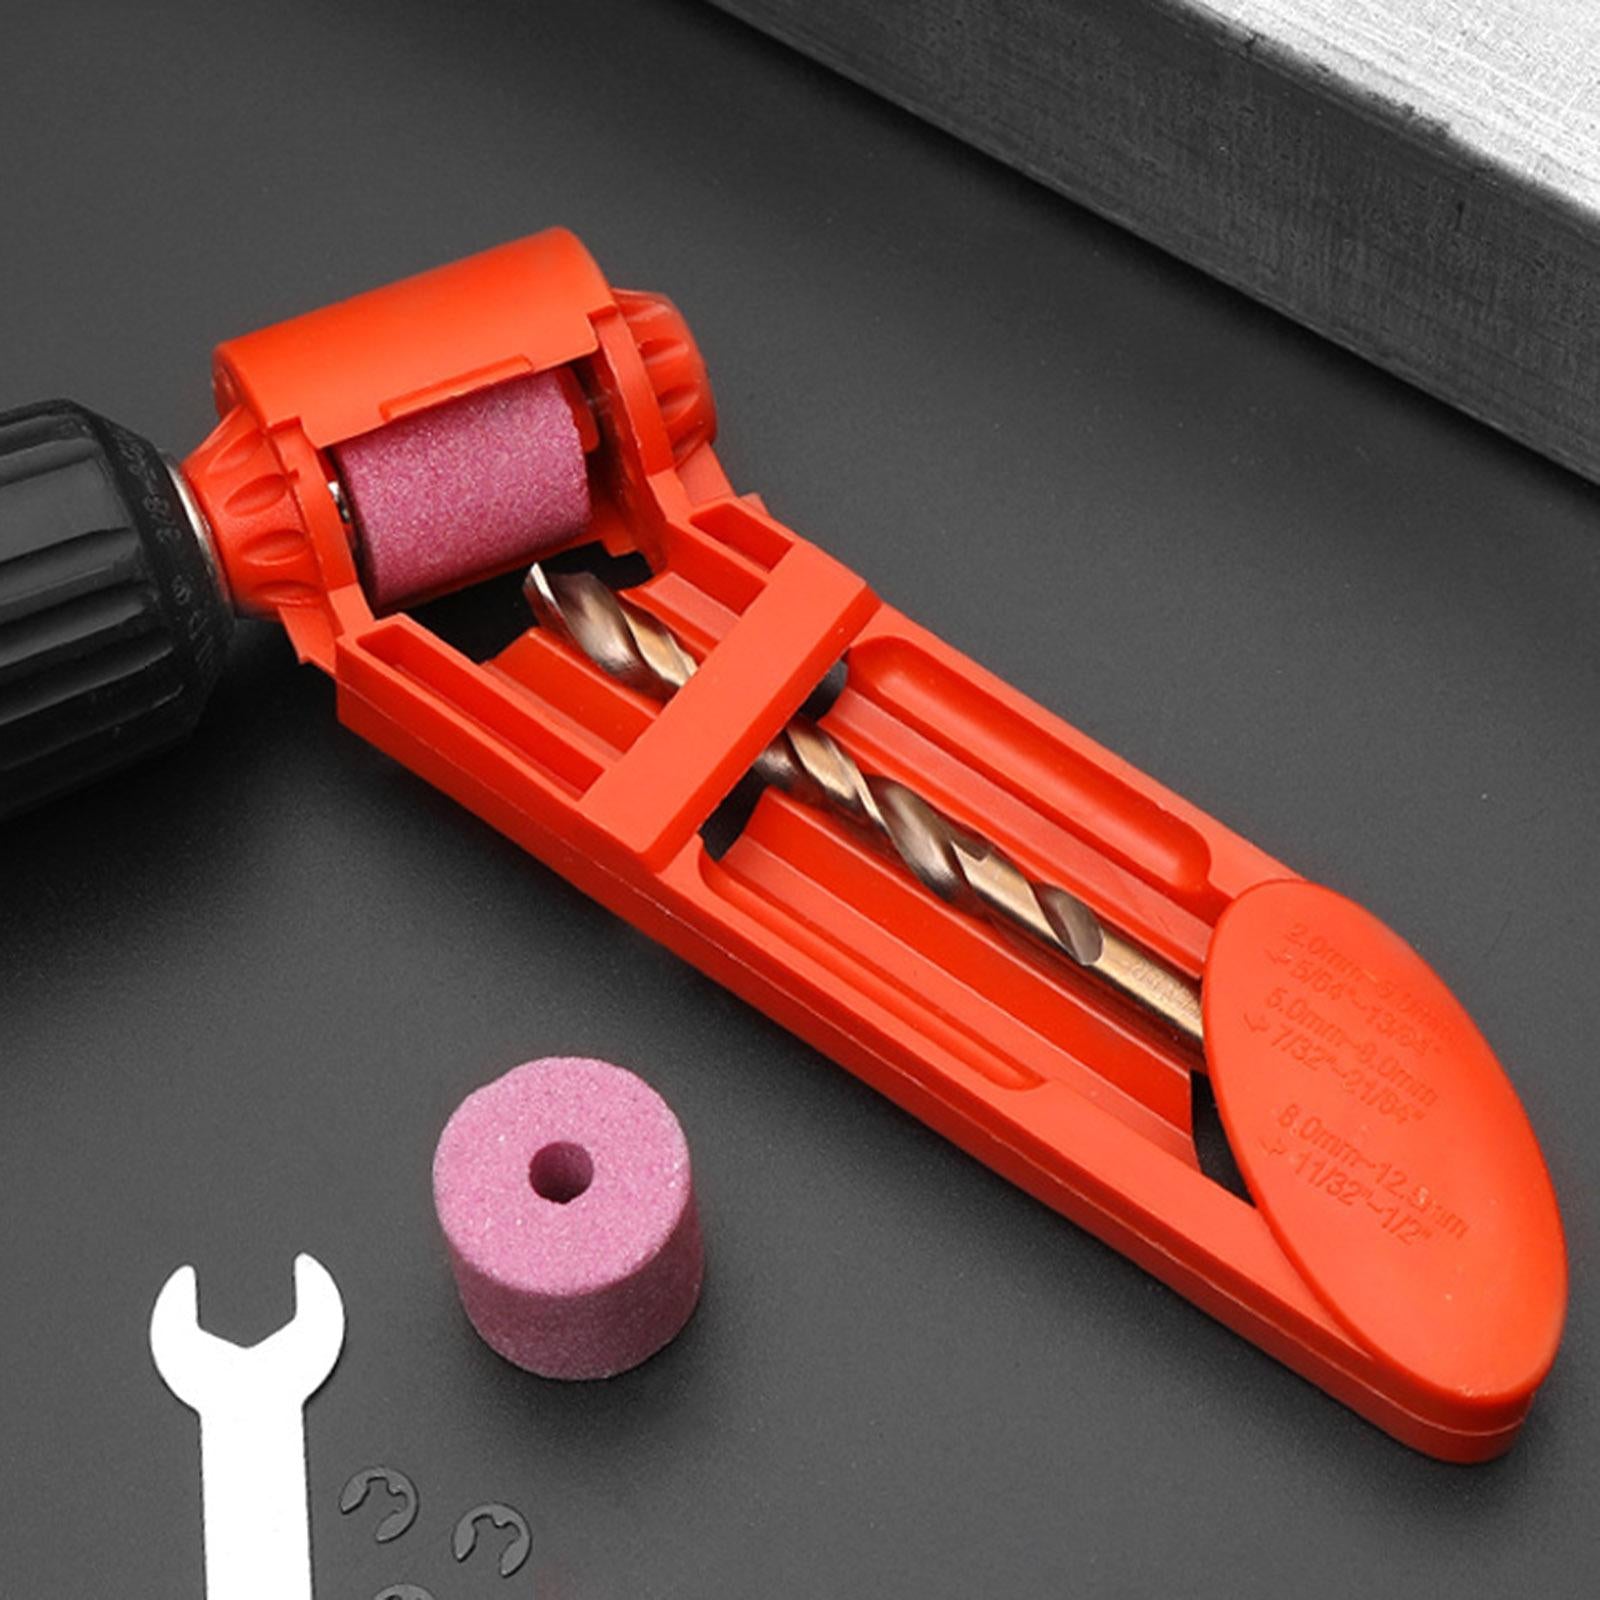 Drill Bit Sharpeners for Step Drill Accessories Woodworking Metalworking orange